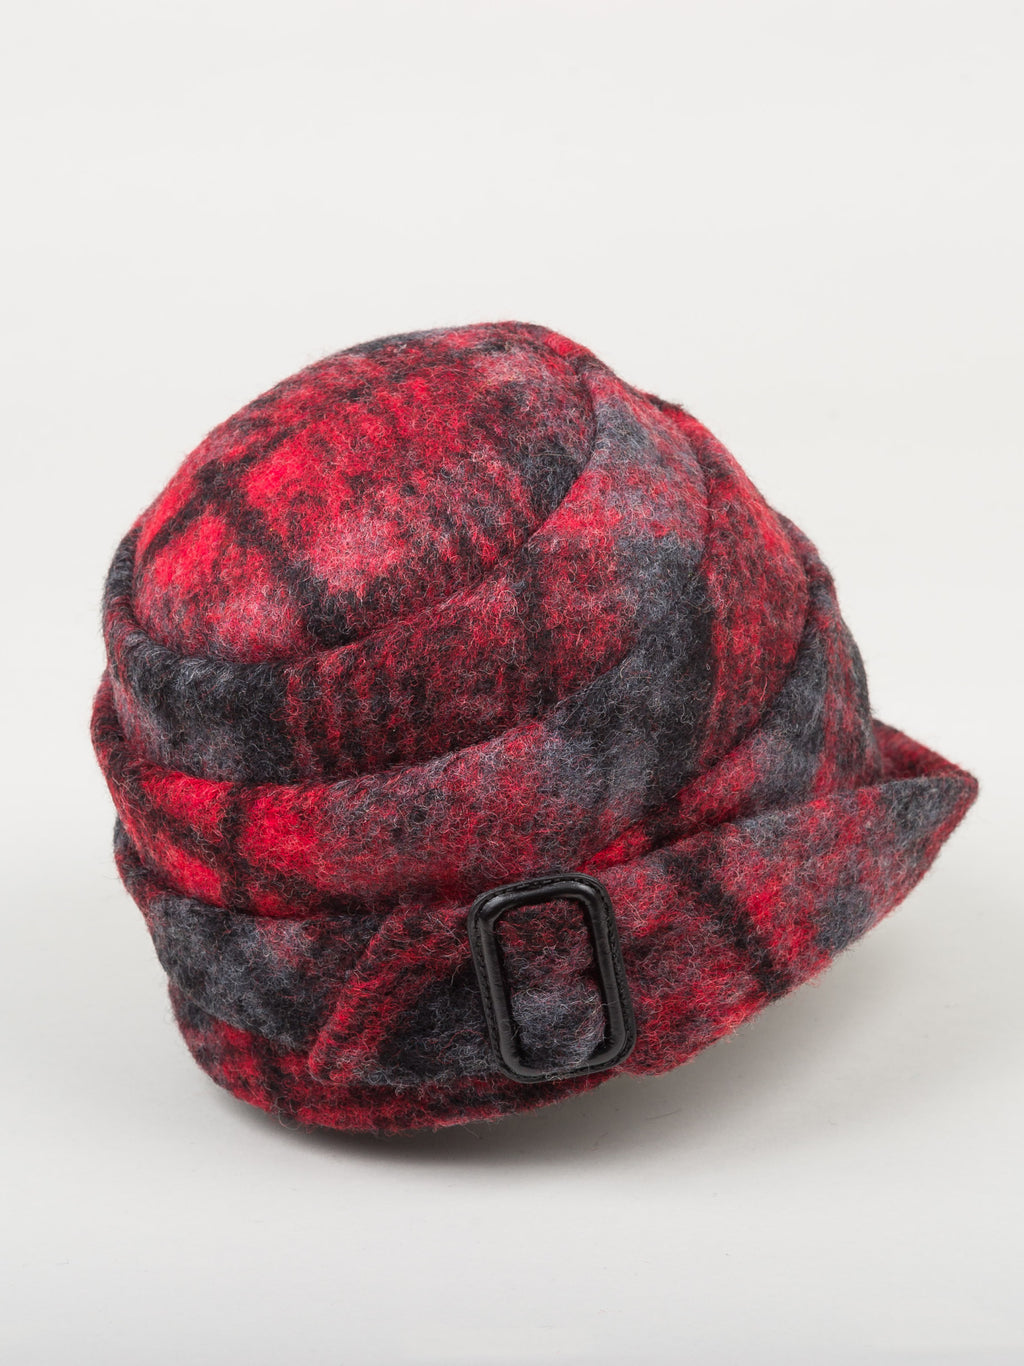 Right side view of a the lillie & cohoe iconic prints lexi hat. This has has red and grey plaid and a tiered/folded crown. The right side of the hat has a decorative black buckle.